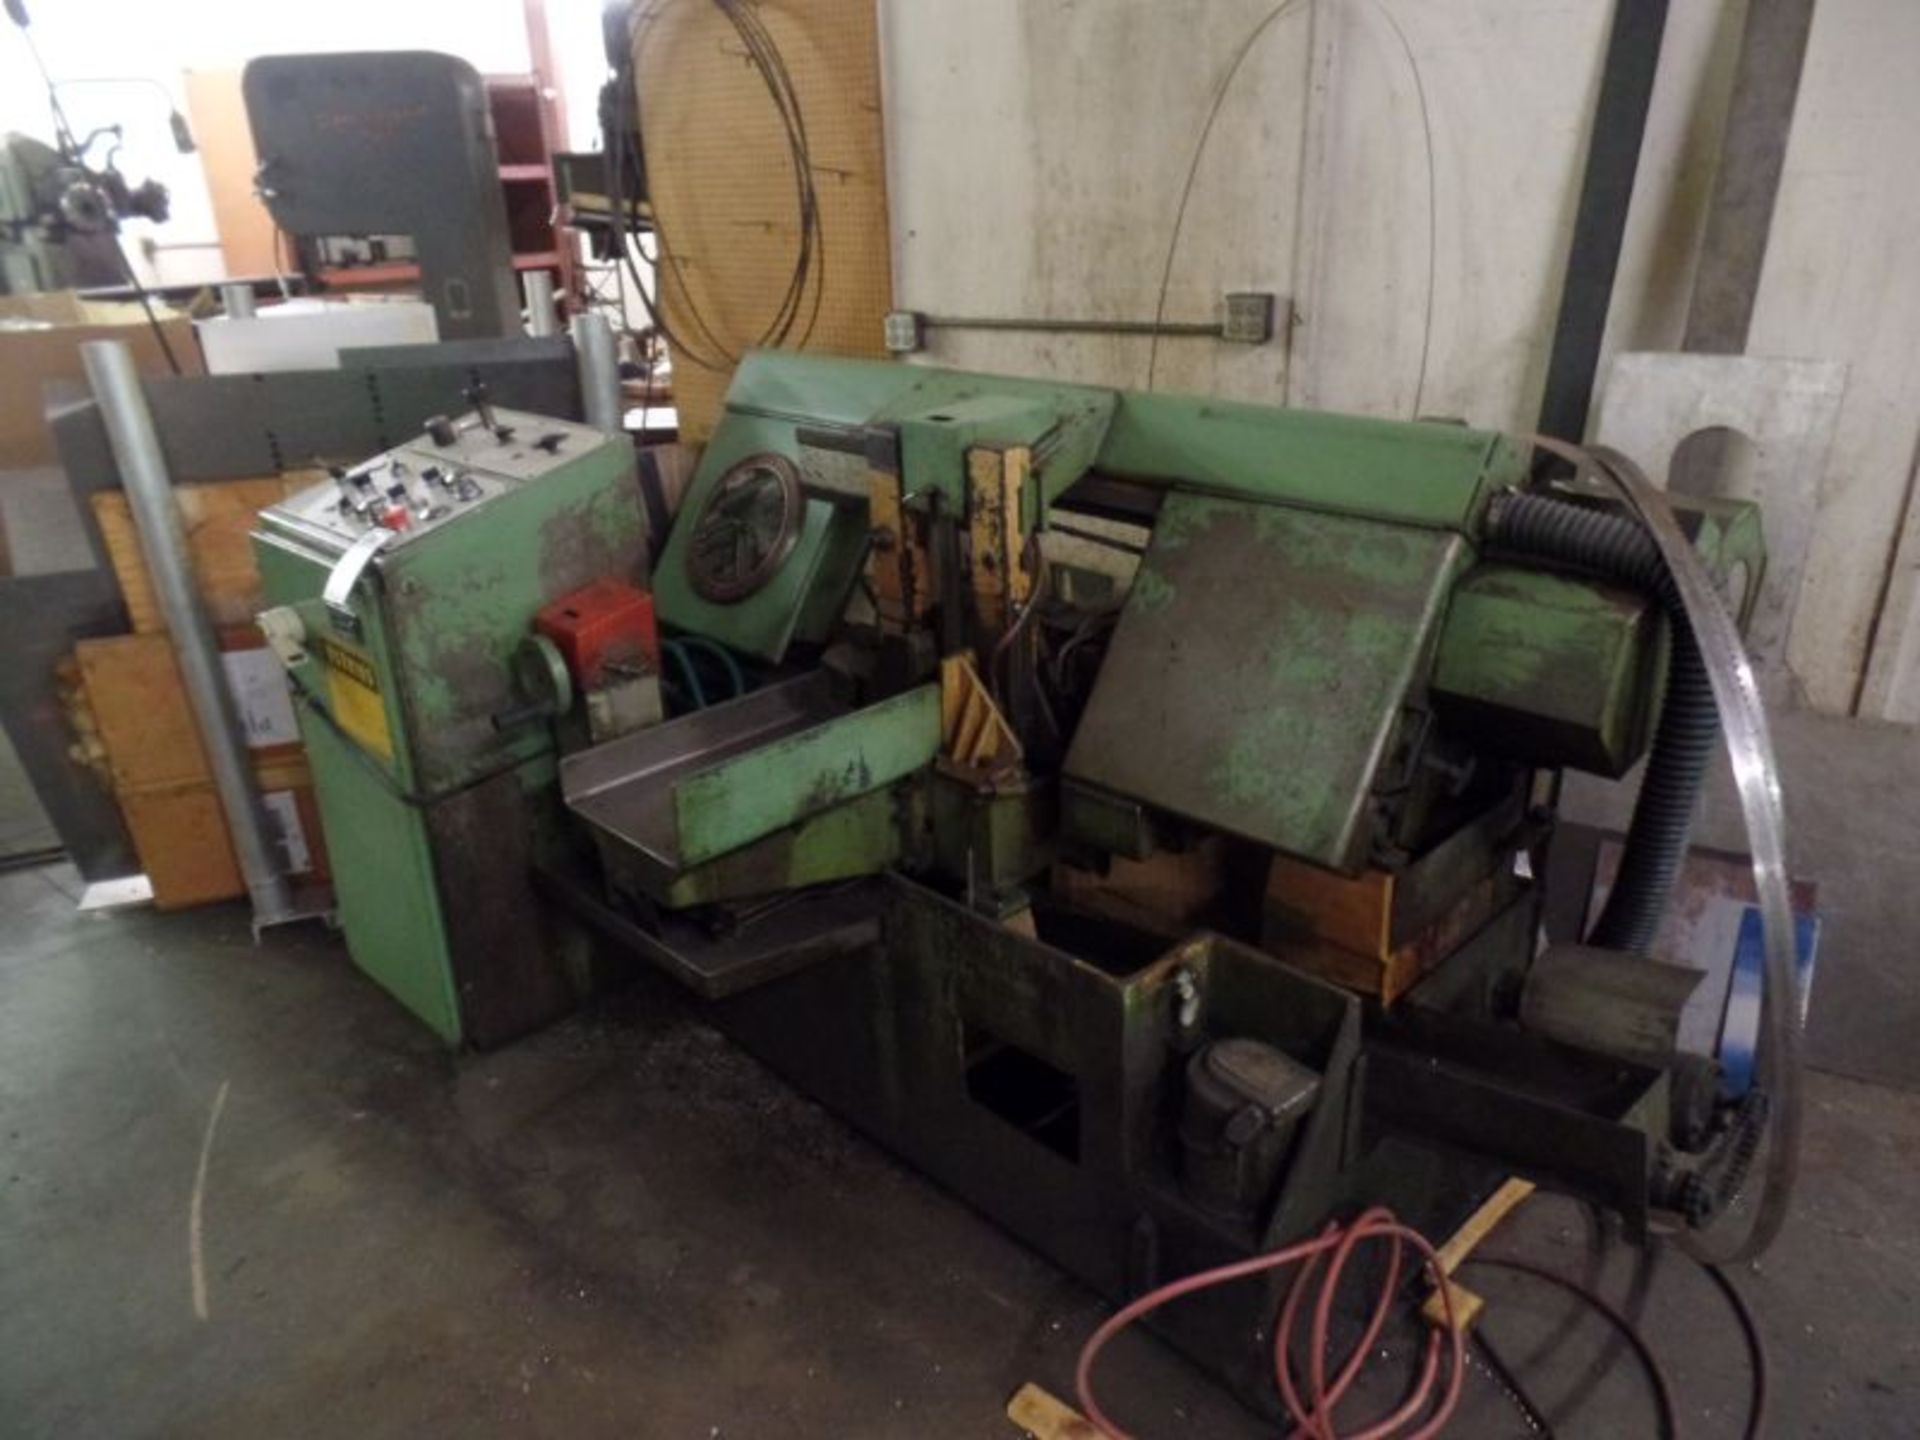 DoALL C-260A Automatic Horiz. Band Saw, 10 1/4" x 12" capacity, power infeed table, new 1988 - Image 3 of 4